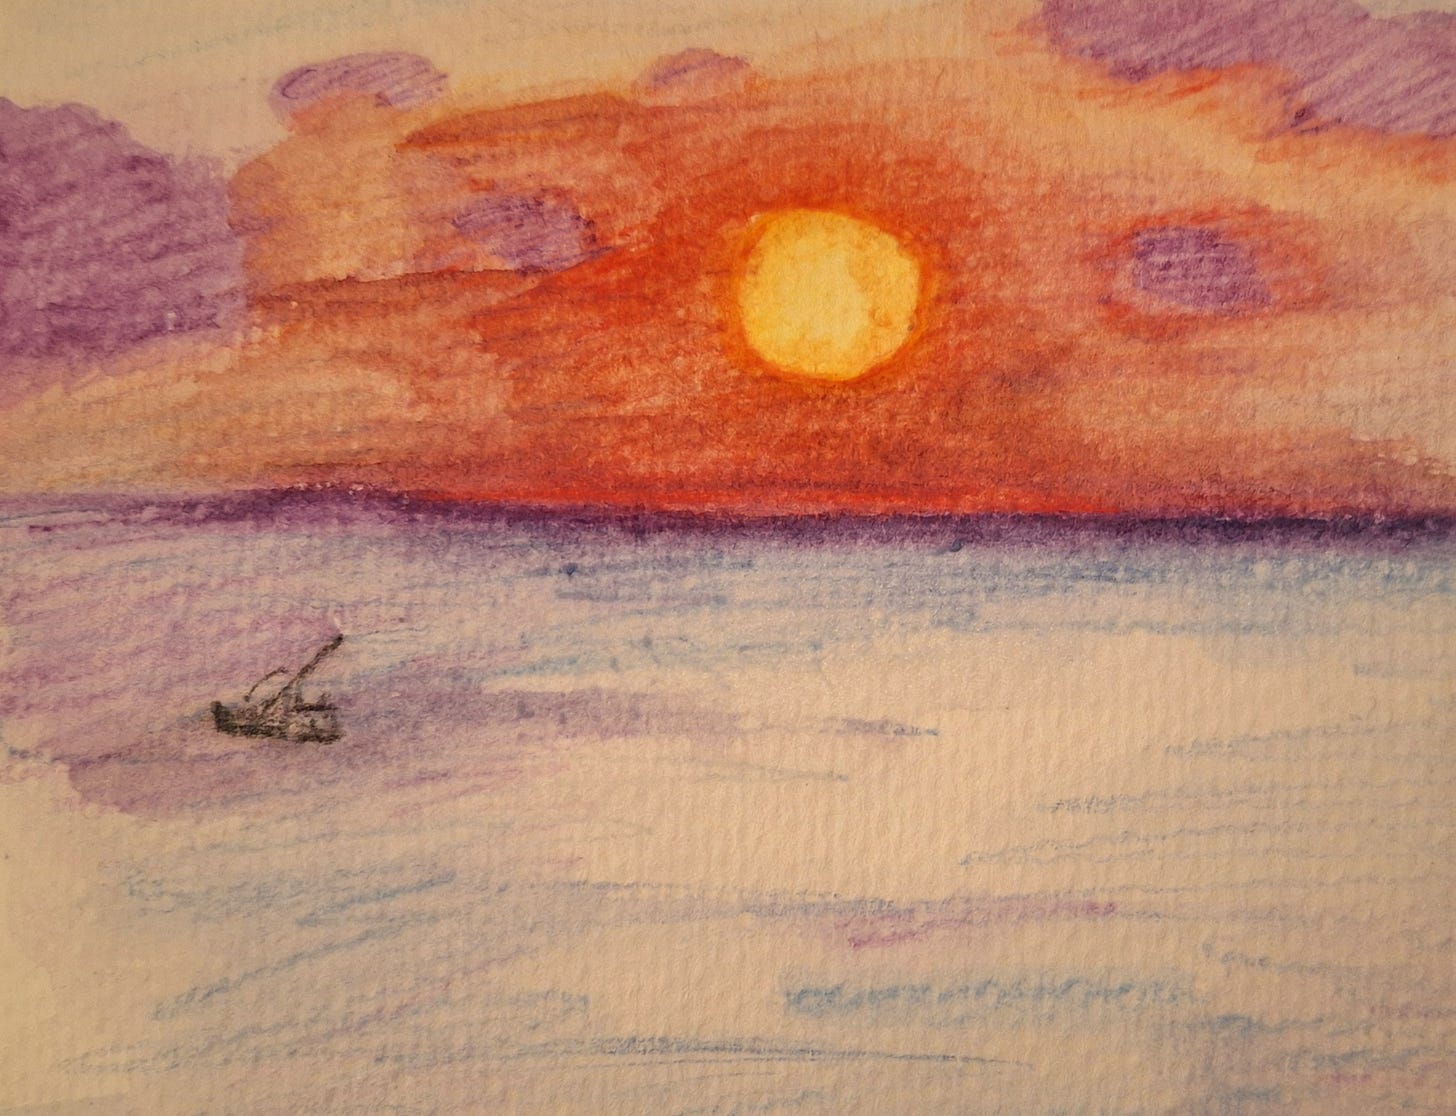 Watercolour pencil sketch of a sunset over Uluwatu in Bali.  The sun is a yellow disc surrounded by red and orange.  purple coulds are reflected in the water.  A lone fishing boat is silhouetted in the mid ground.